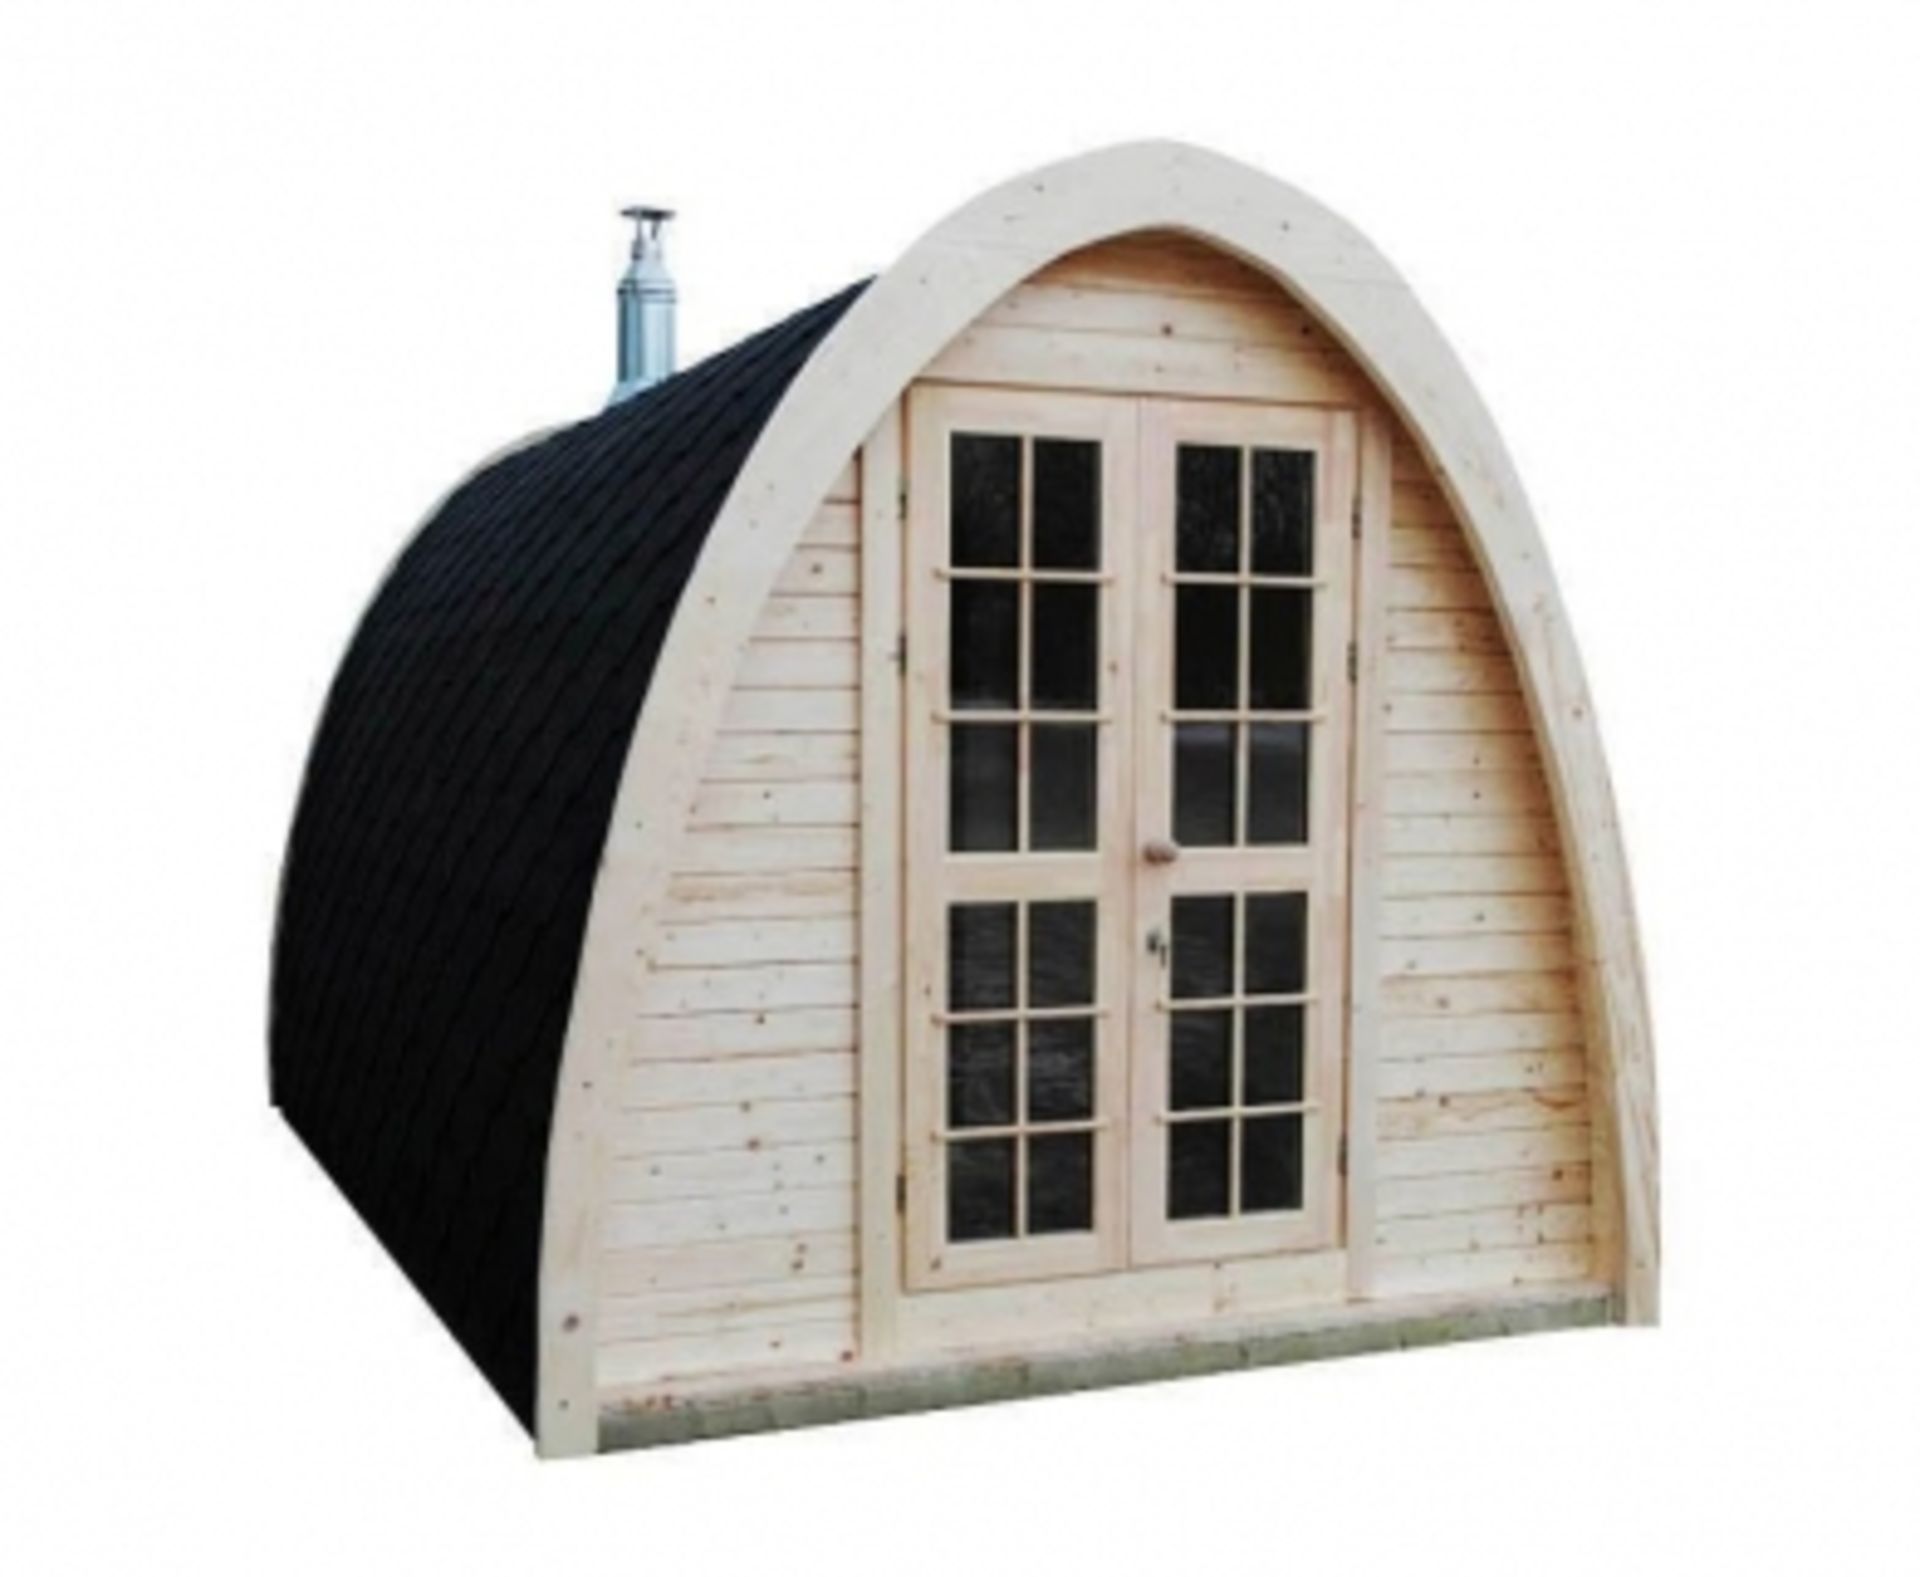 + VAT Brand New 2.4 x 2.3m Sauna Pod - Roof Cover With Bitumen Shingles - Two Tempered Glass